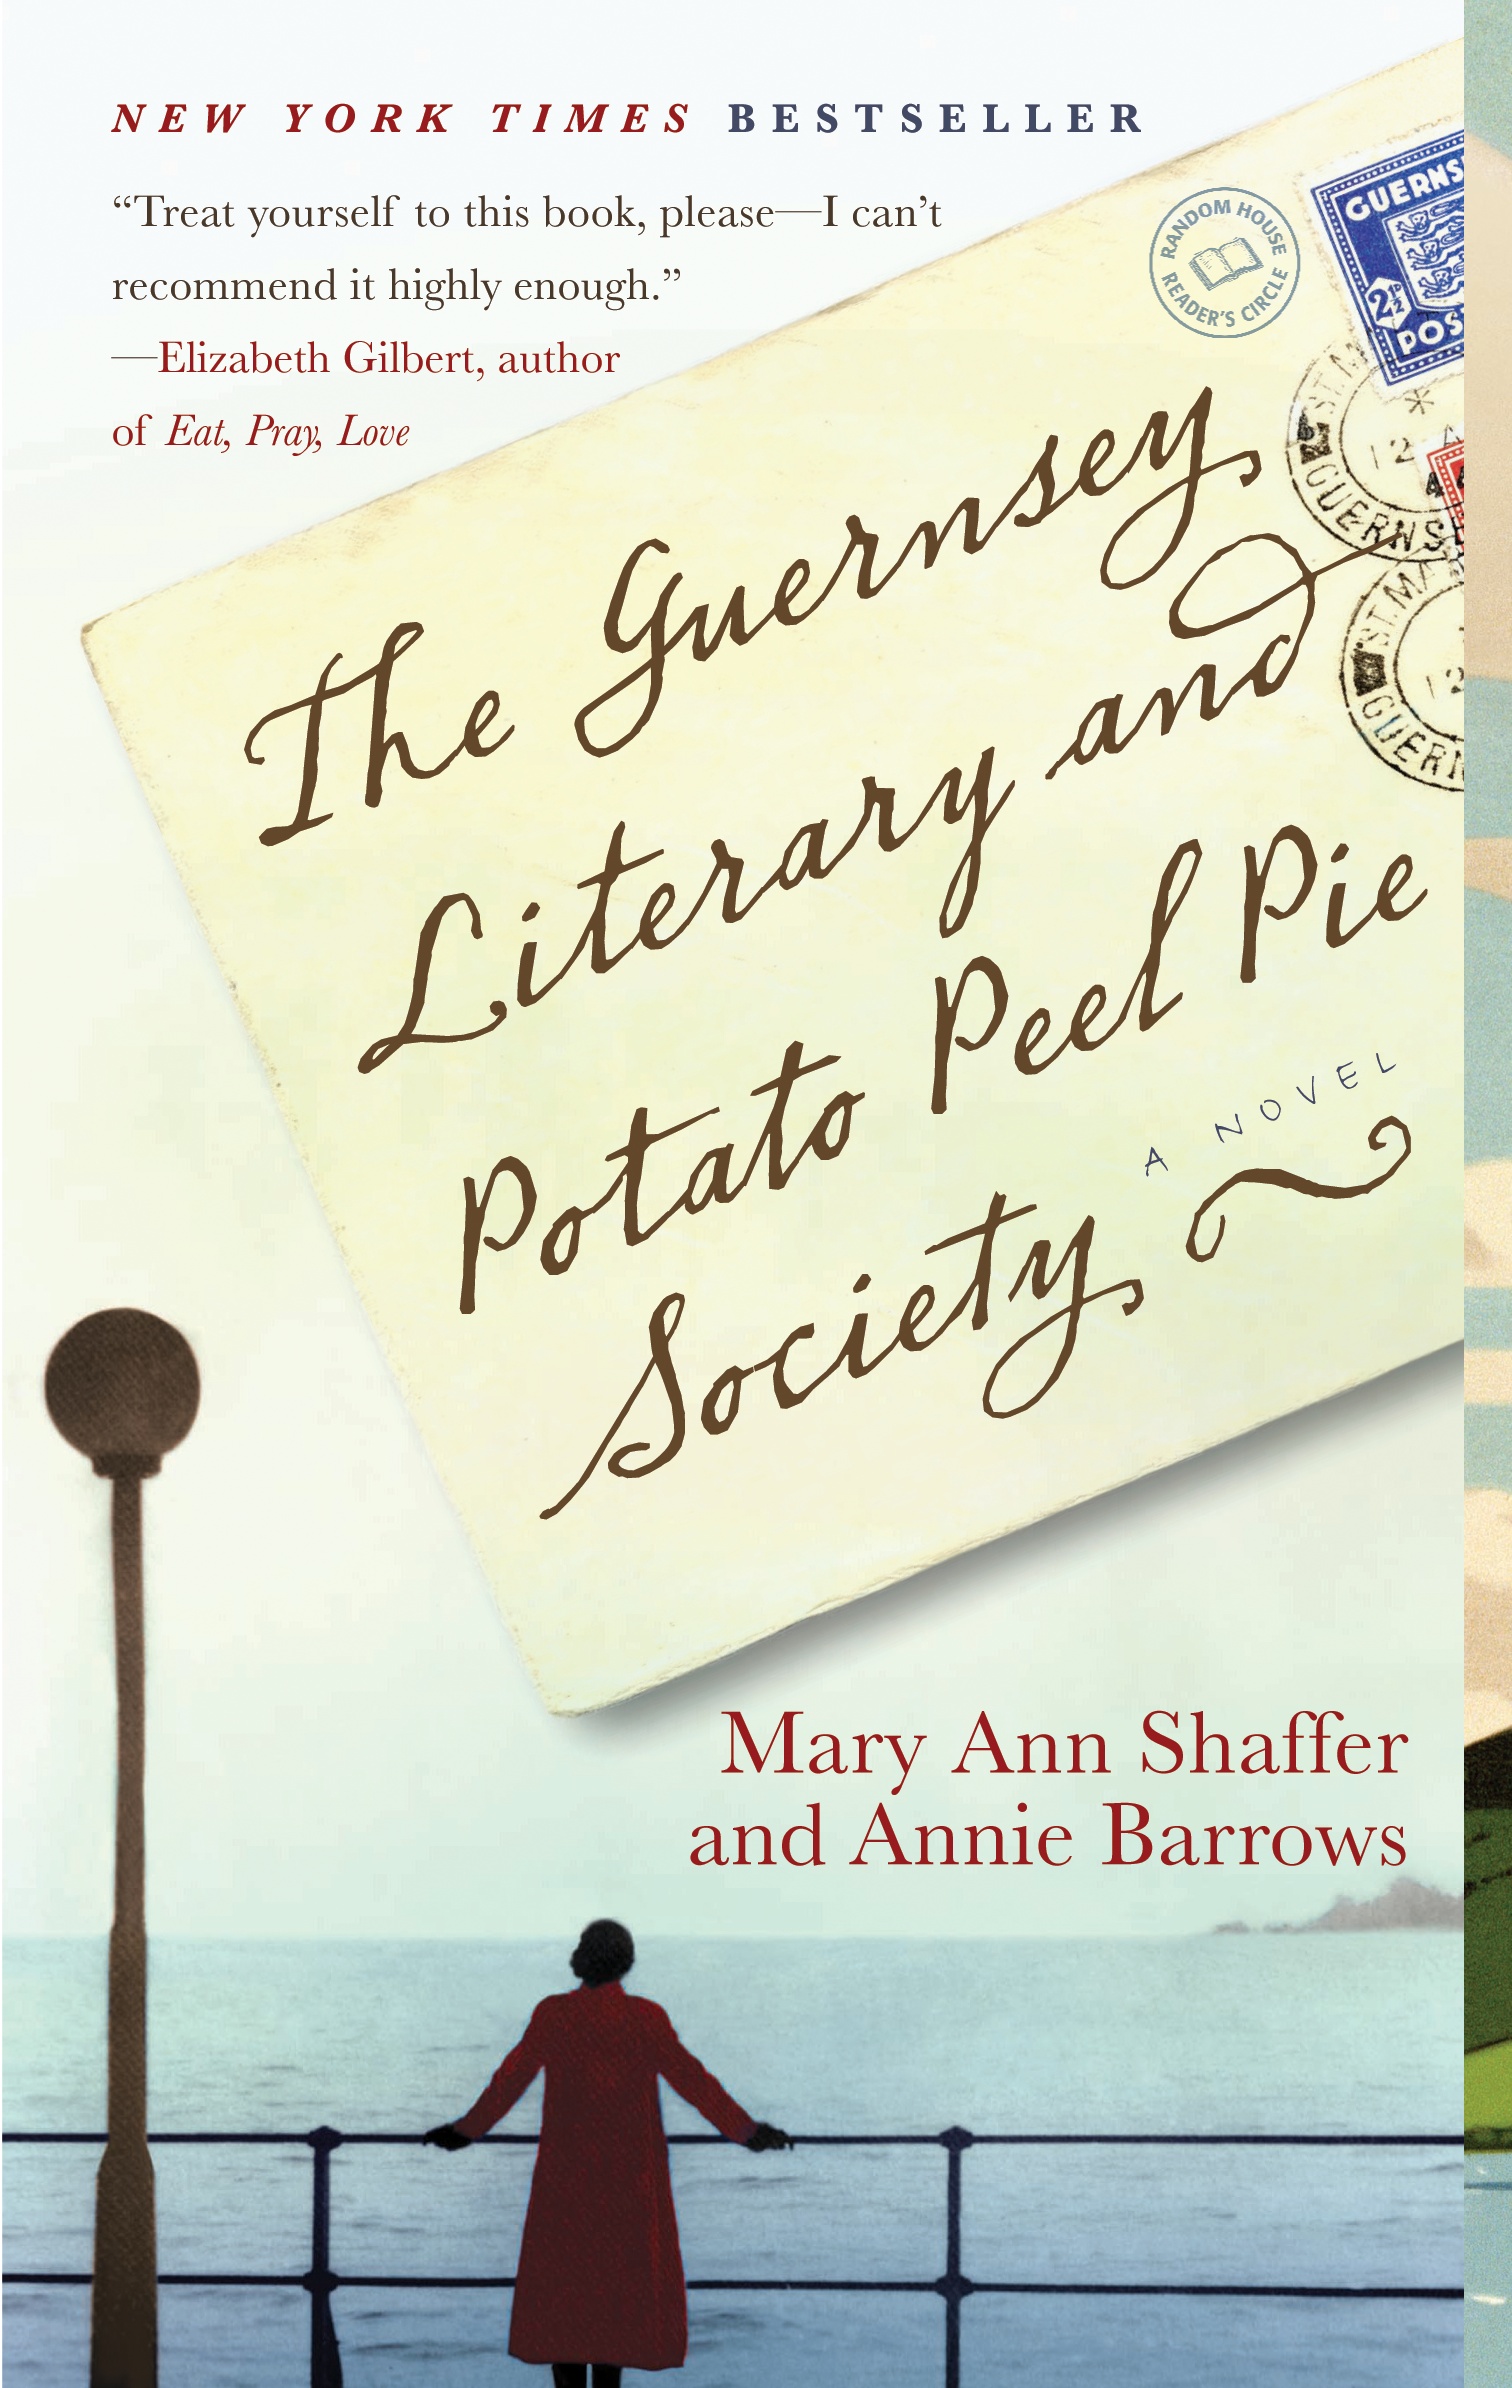 The Guernsey Literary and Potato Peel Pie Society Mary Ann Shaffer and Annie Barrows